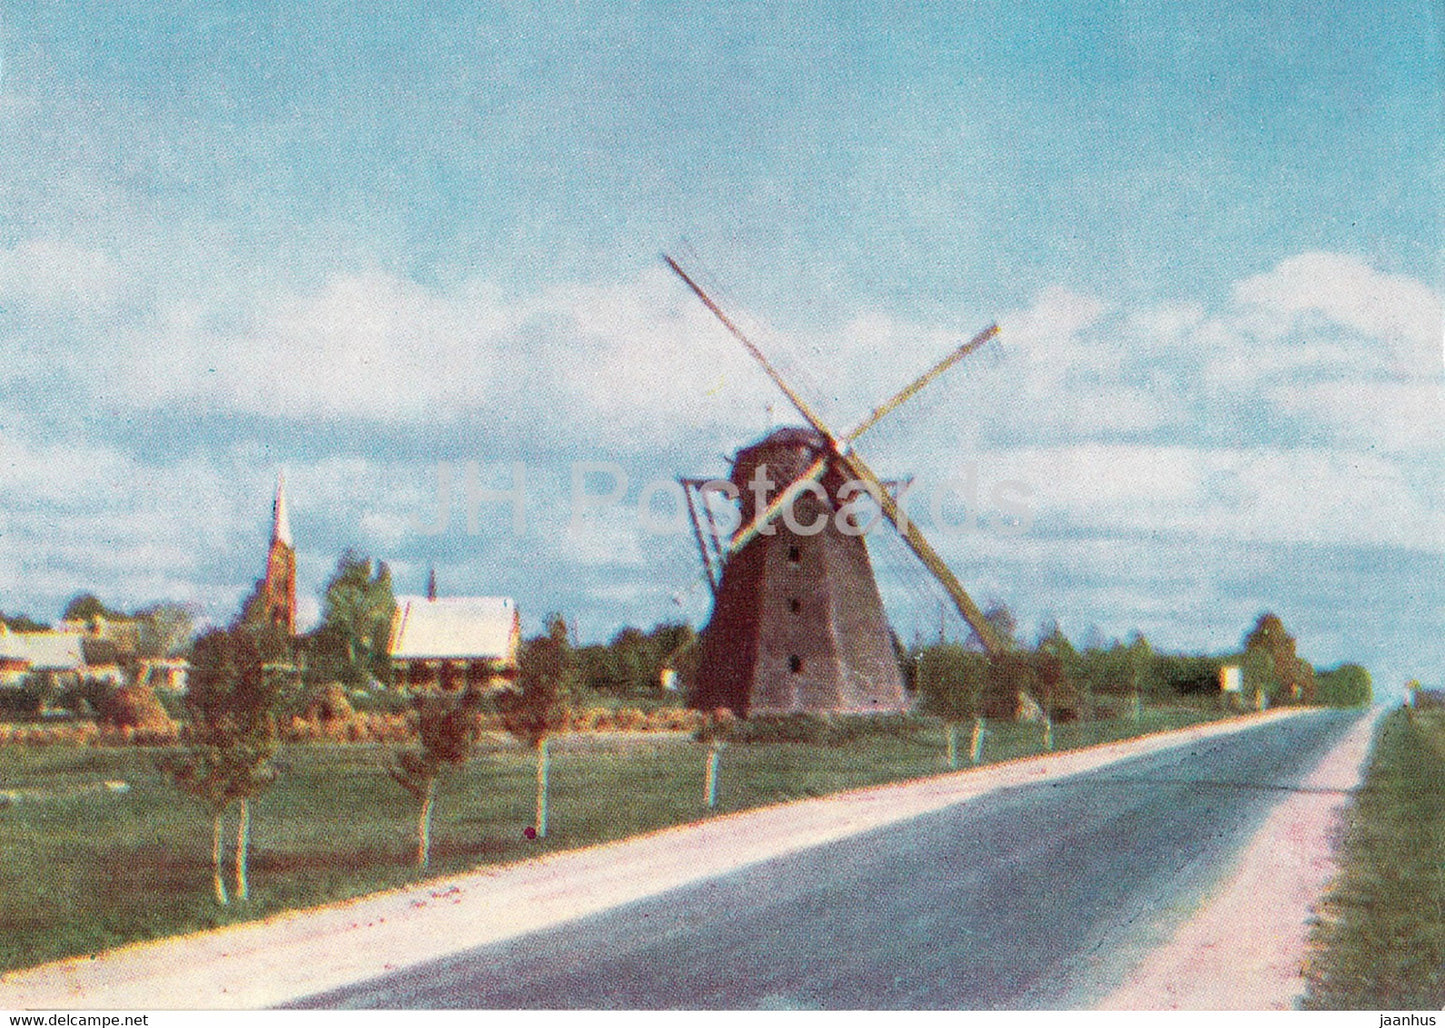 In central Lithuania - windmill - Lithuania USSR - unused - JH Postcards